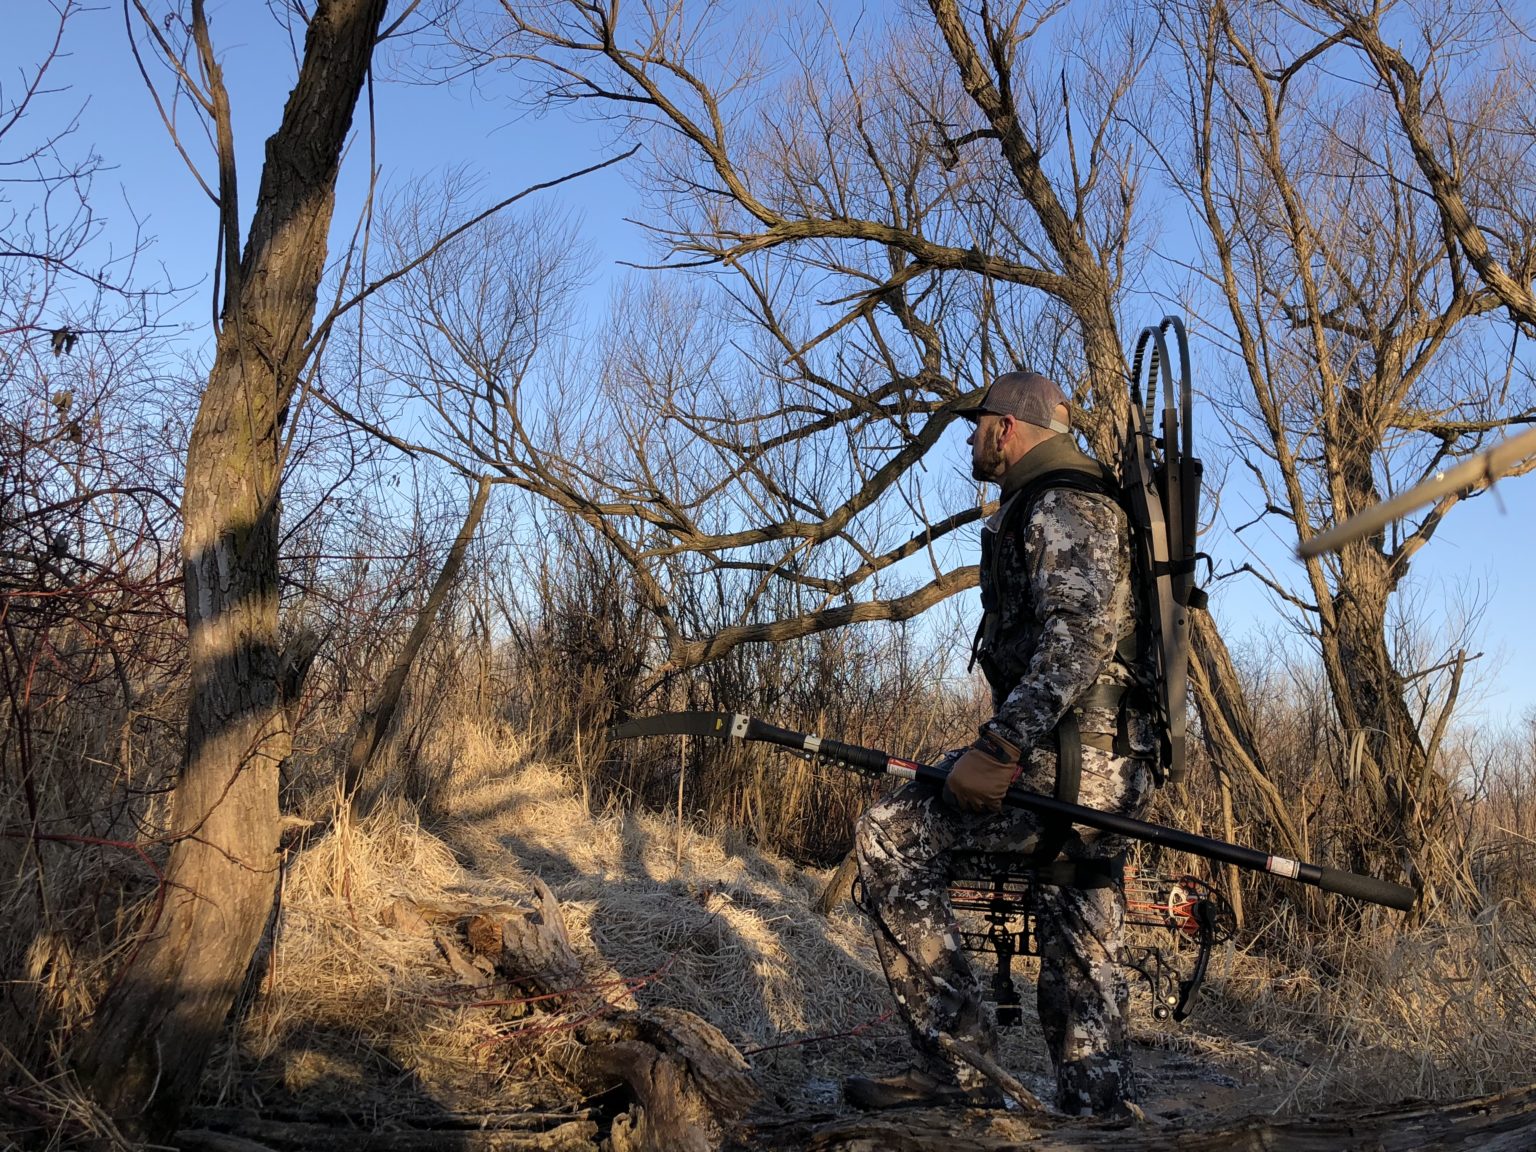 How To Use A Climbing Treestand | Bowhunting.com